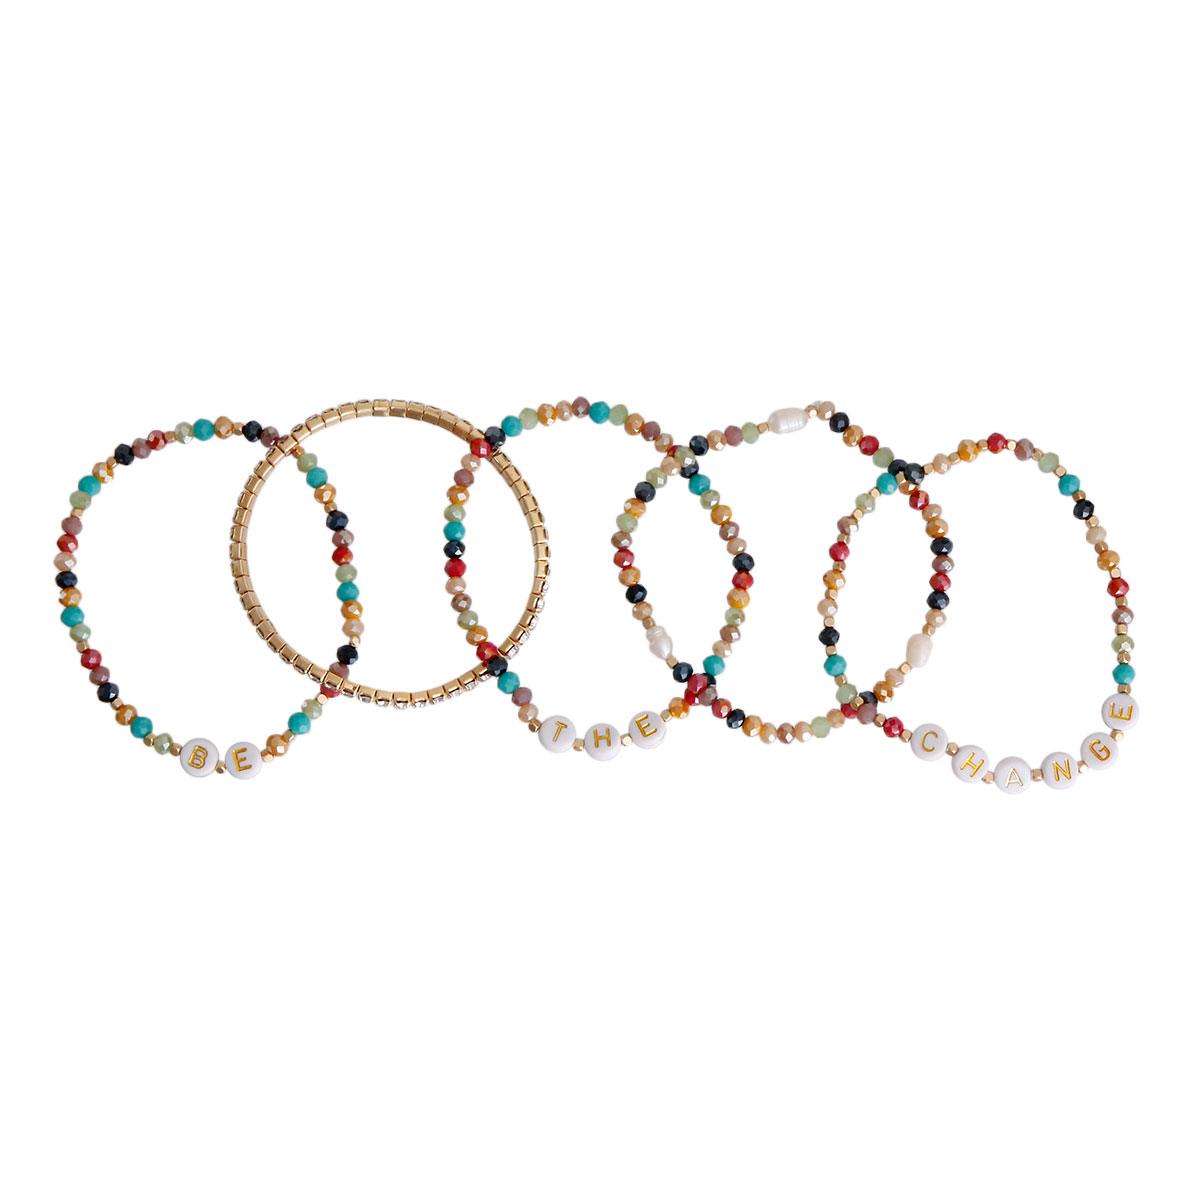 Shop Now: Beaded Bracelets for Women - Symbolize Change Today!